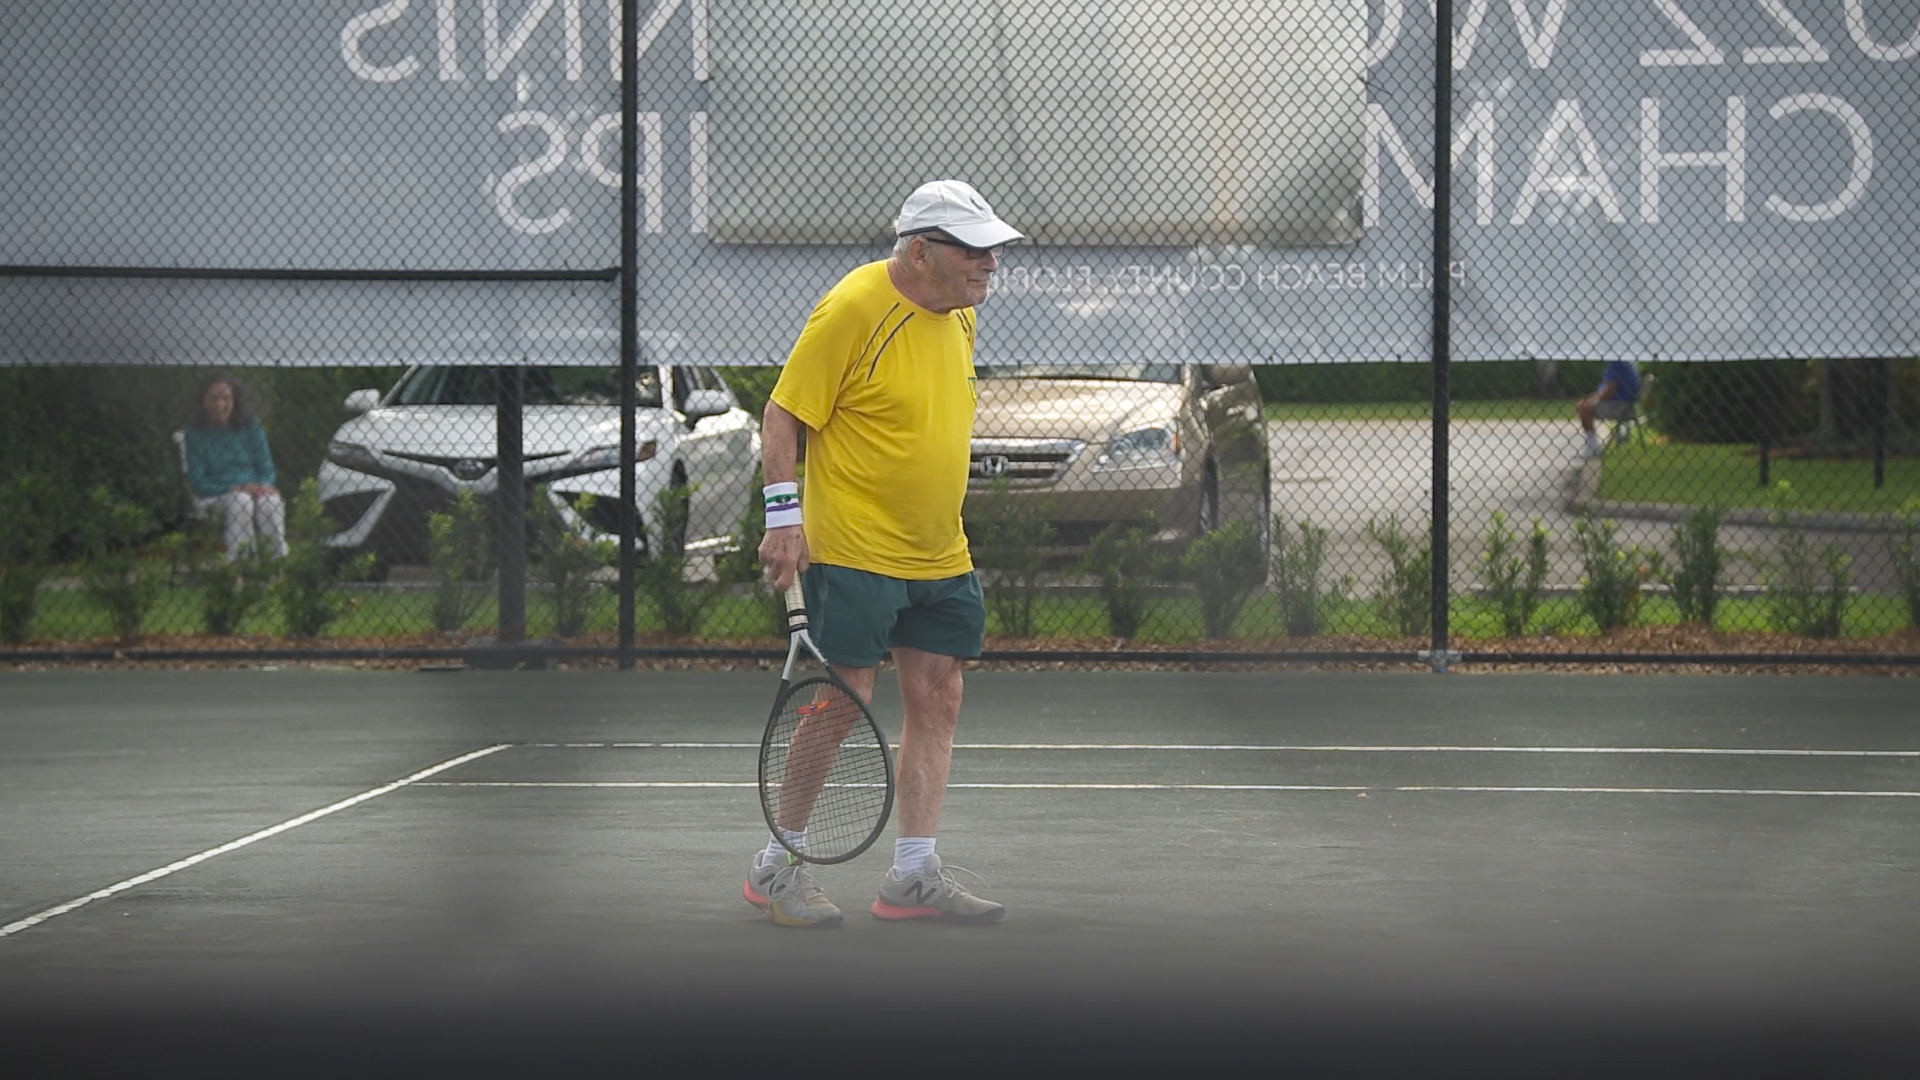 Ukraine represented by 98-year-old at ITF Super Seniors World Individual Championships